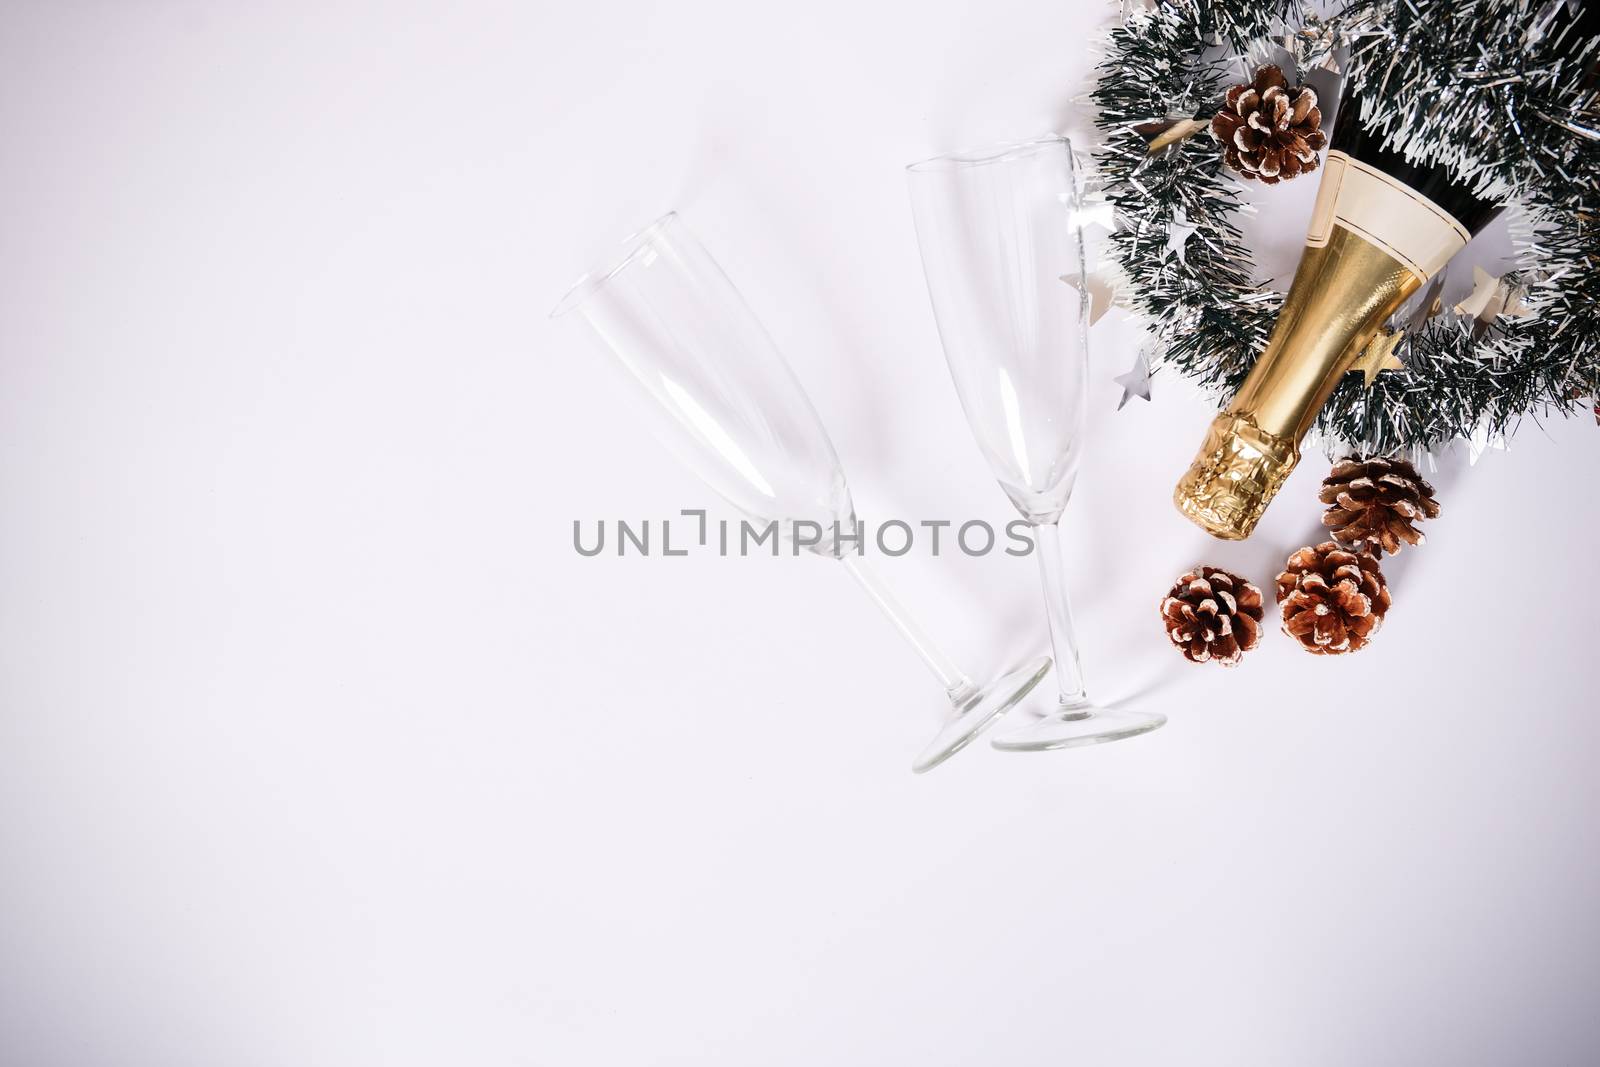 Champagne bottle with two glasses, garland and pinecone decorati by Mendelex